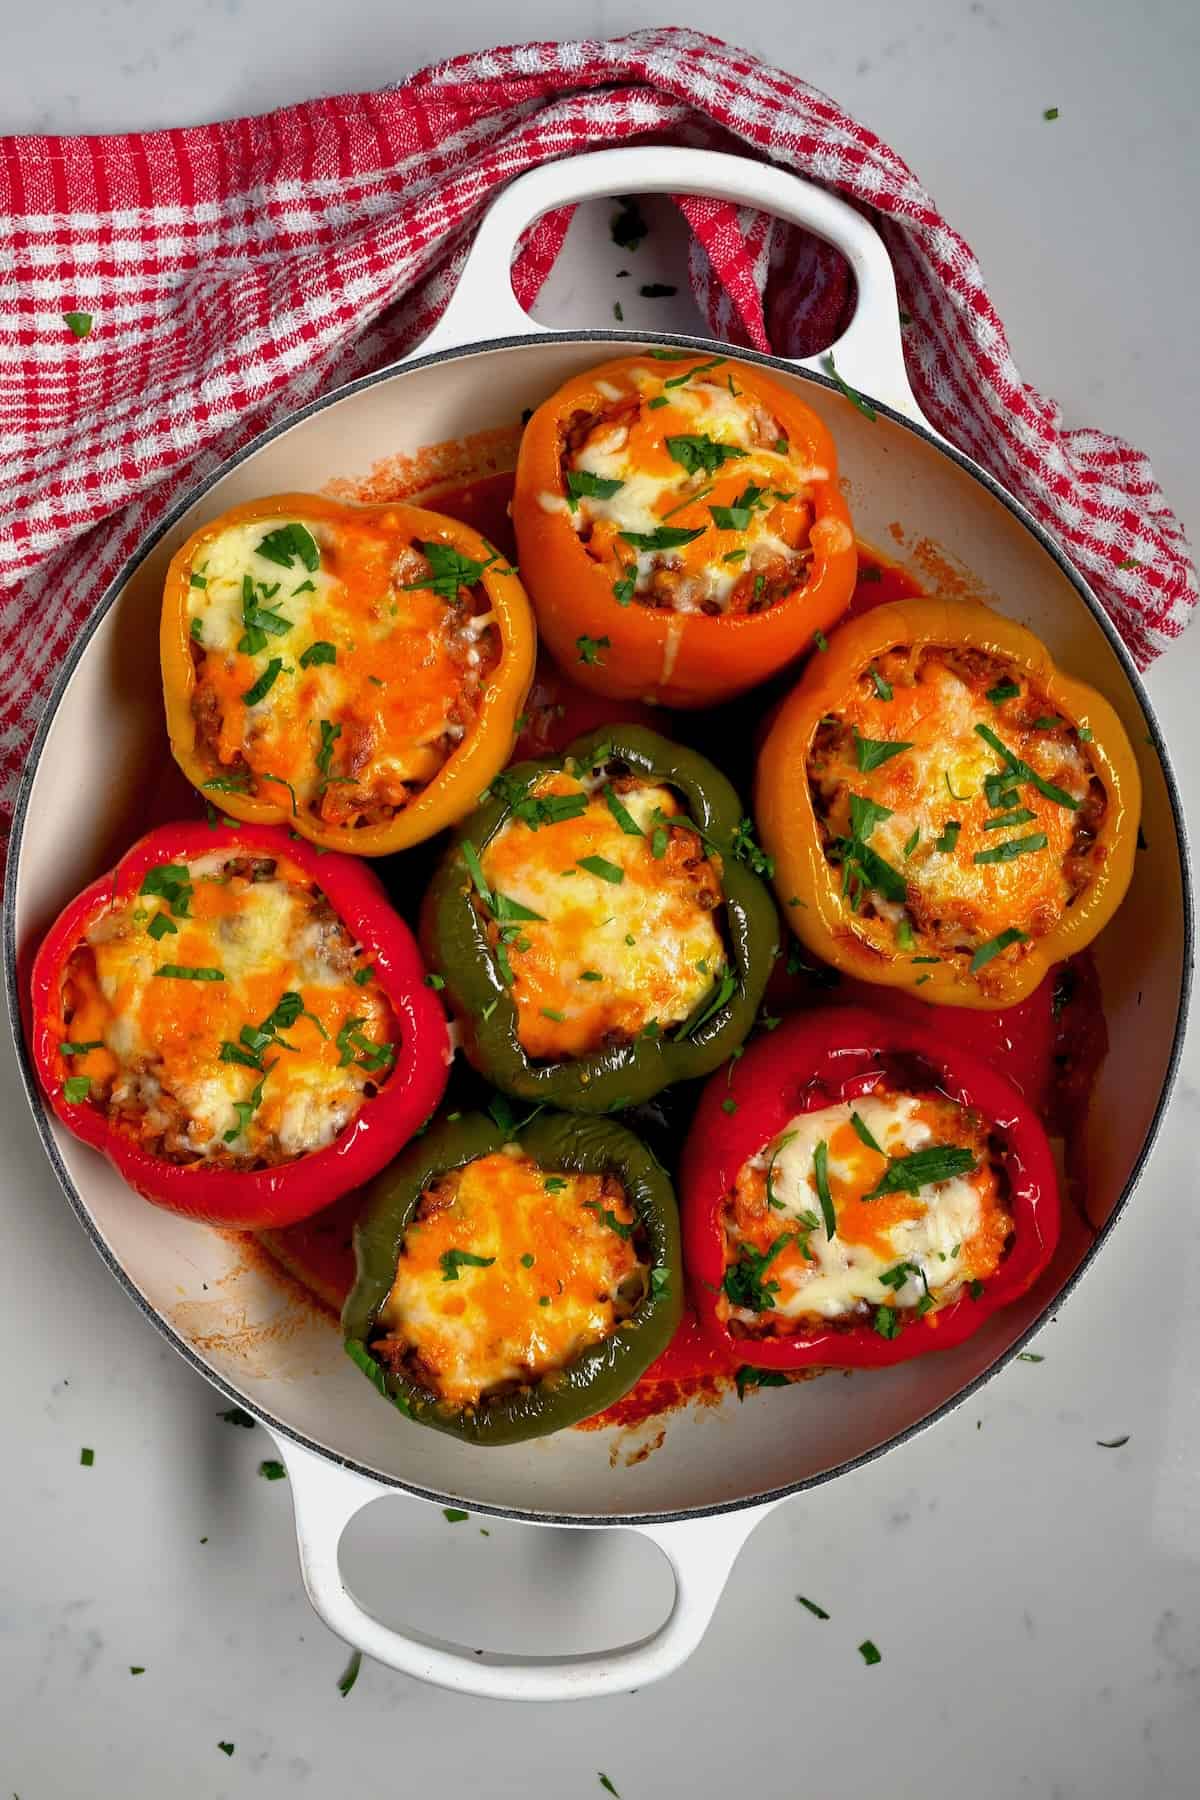 Seven stuffed bell peppers topped with melted cheese and parsley